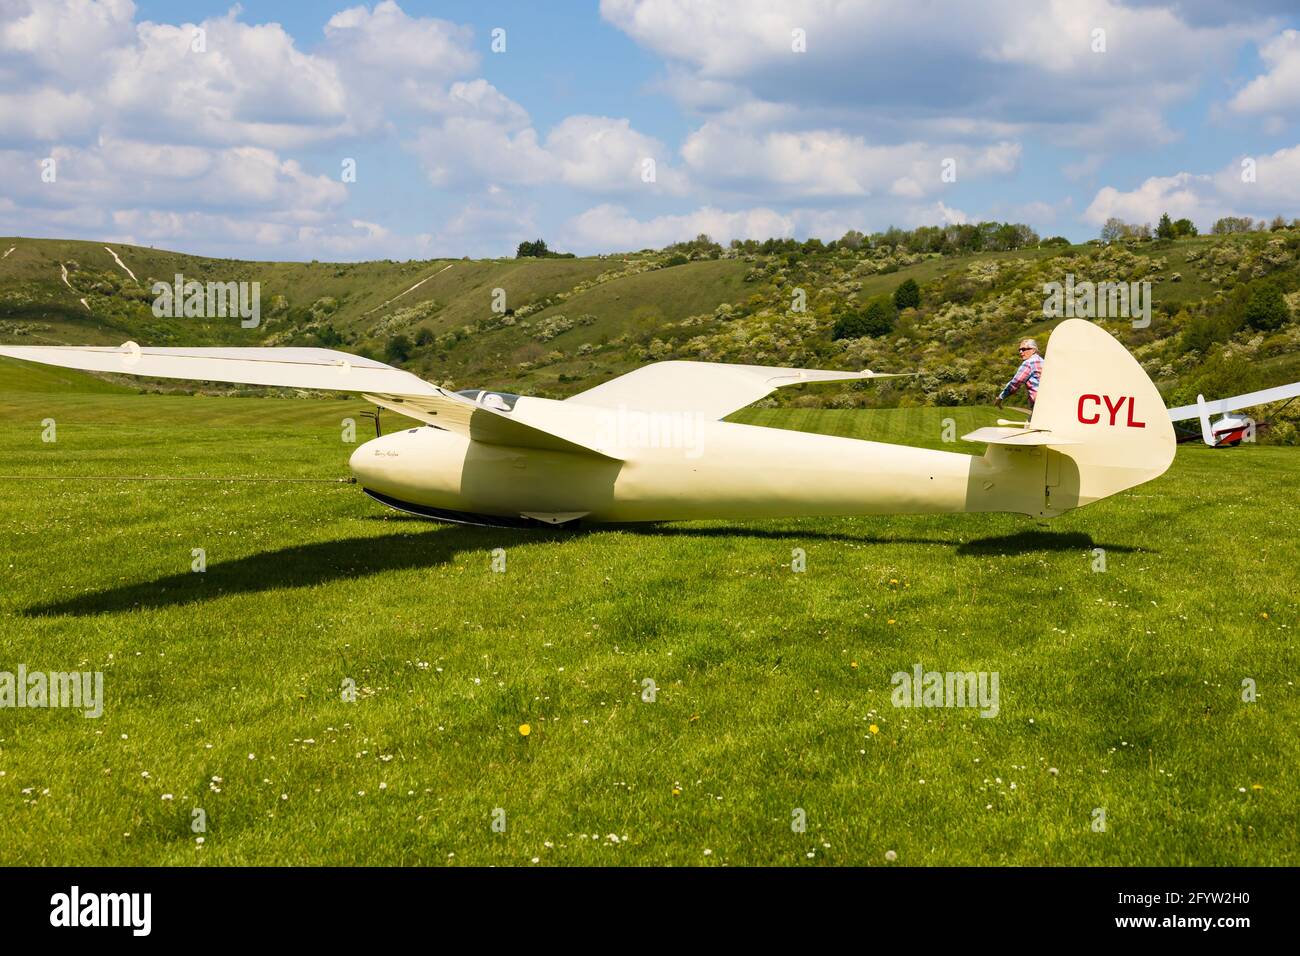 Vintage Goppingen Minimoa glider at the London Gliding Club, based at Dunstable, Bedfordshire, England Stock Photo